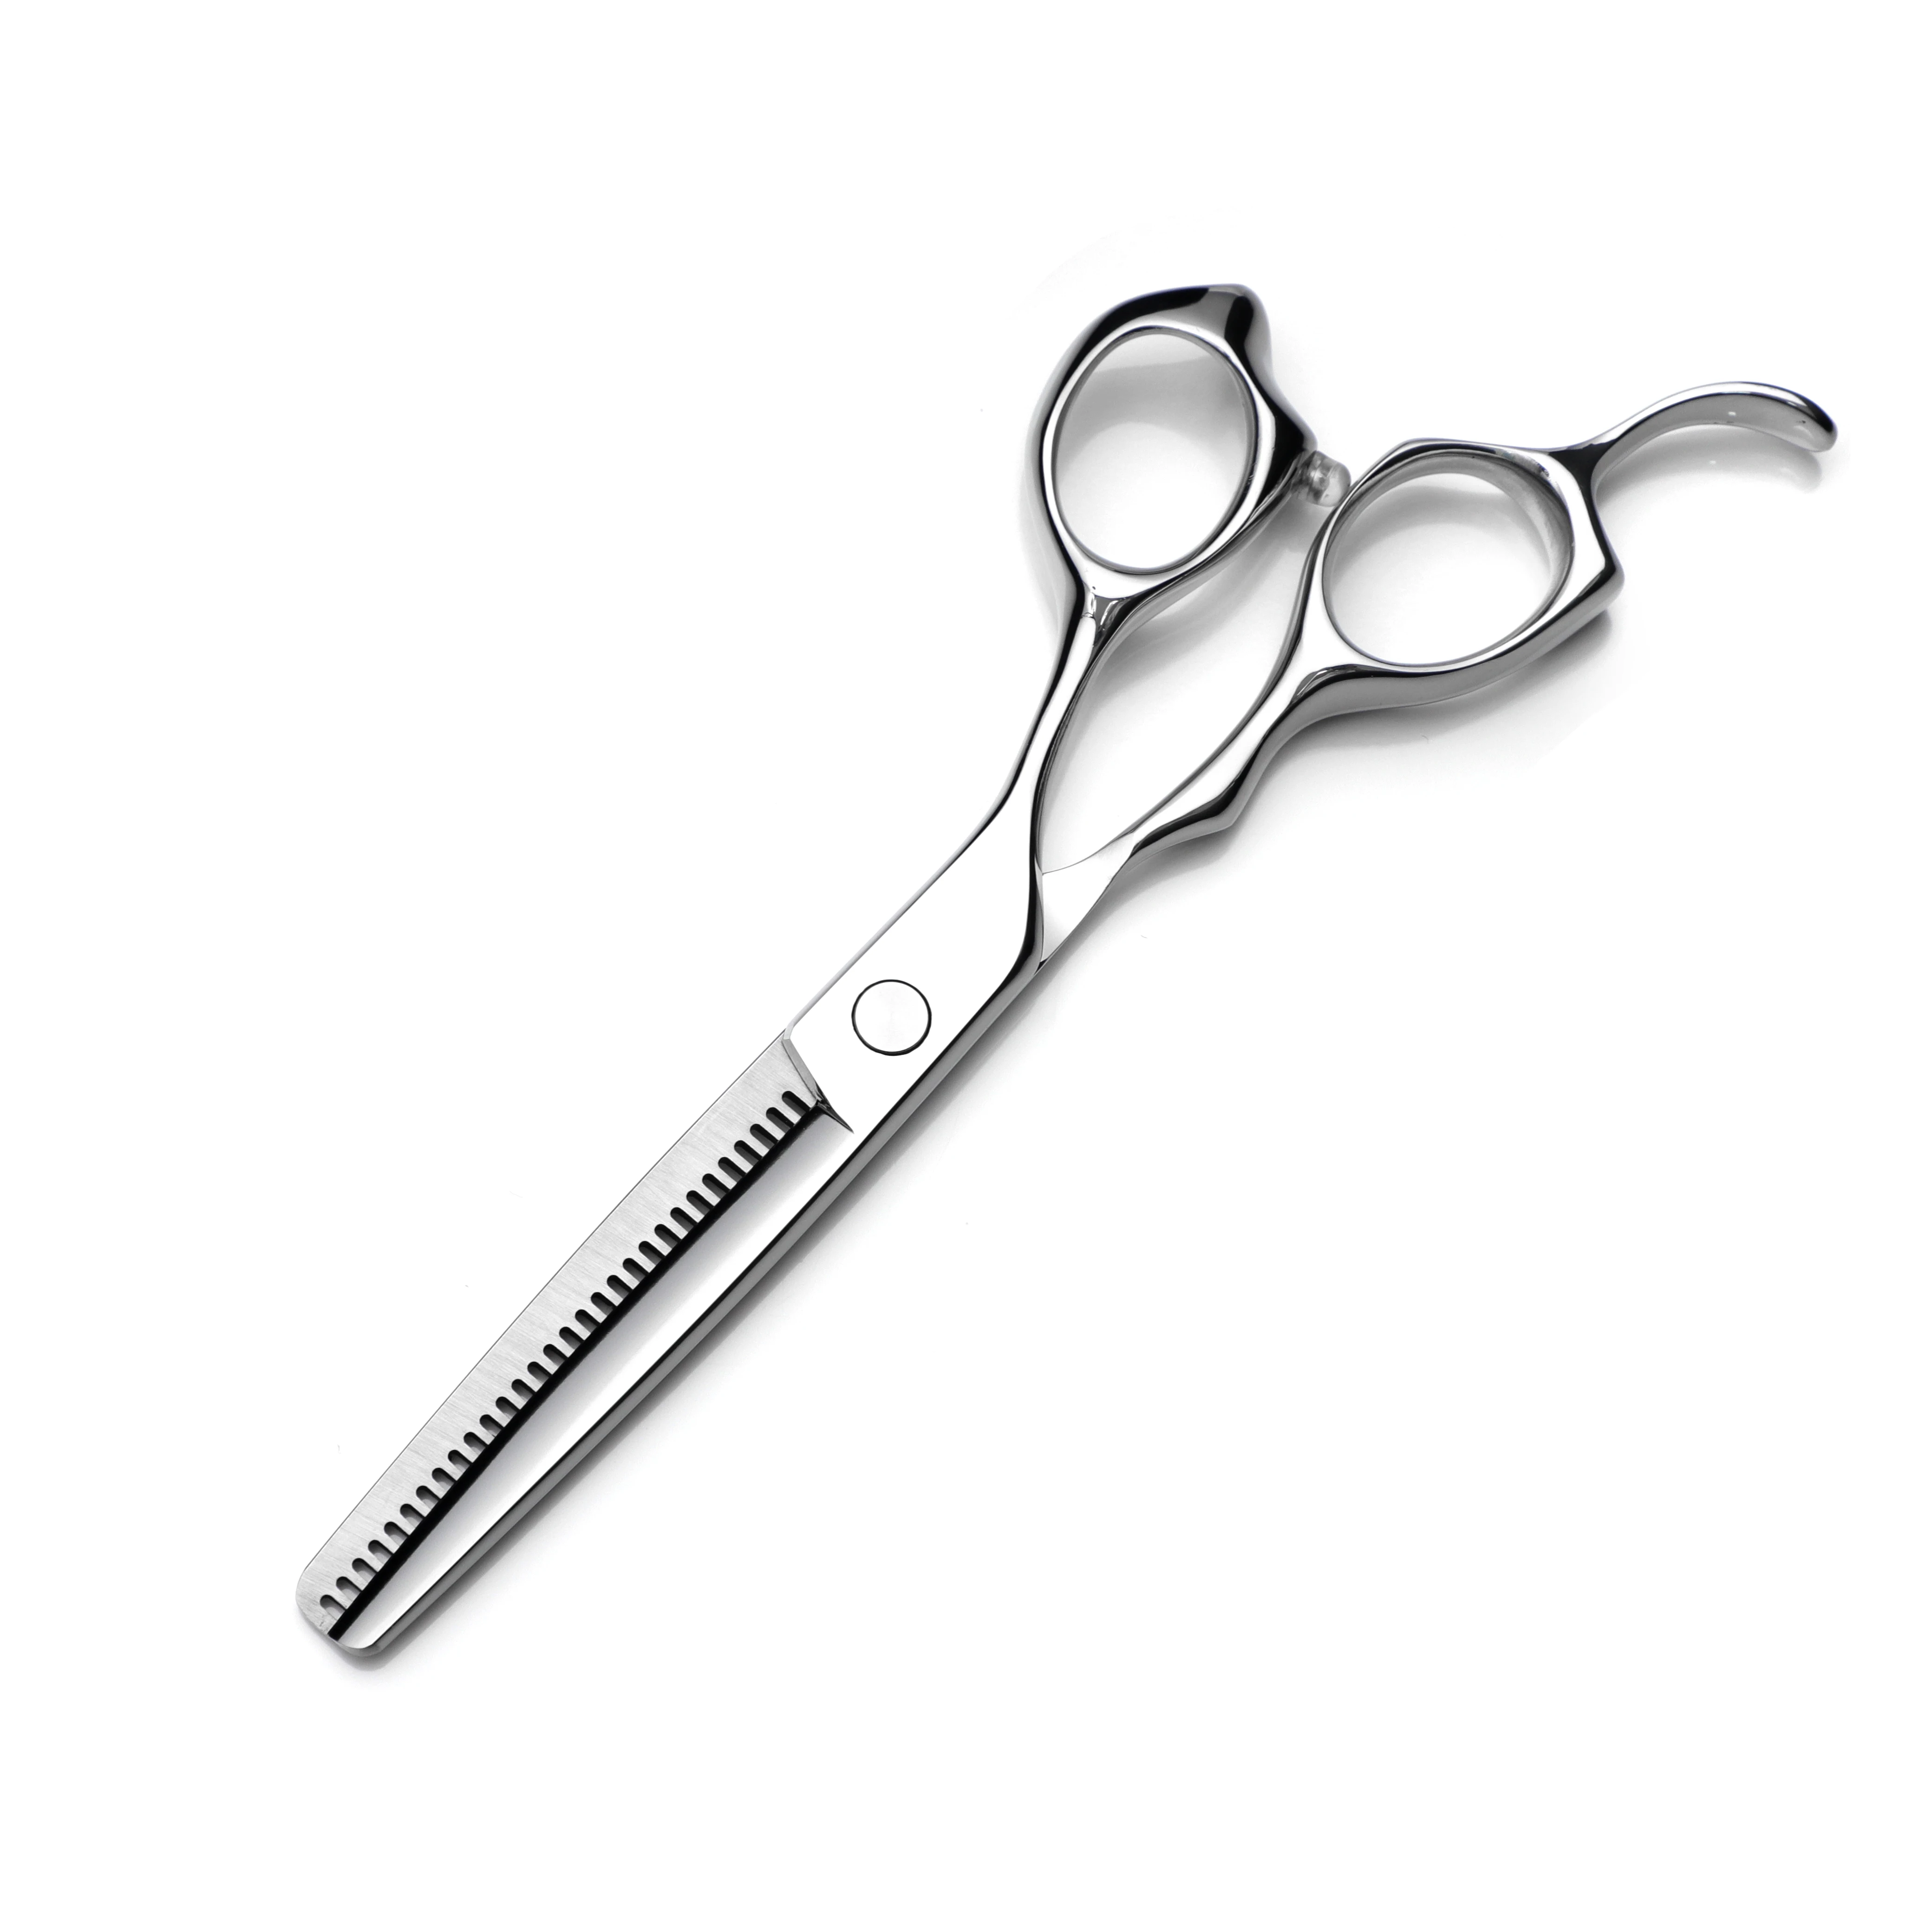 6 Inch professional hairdressing thinning scissor hair salon scissors hair cutting scissors set